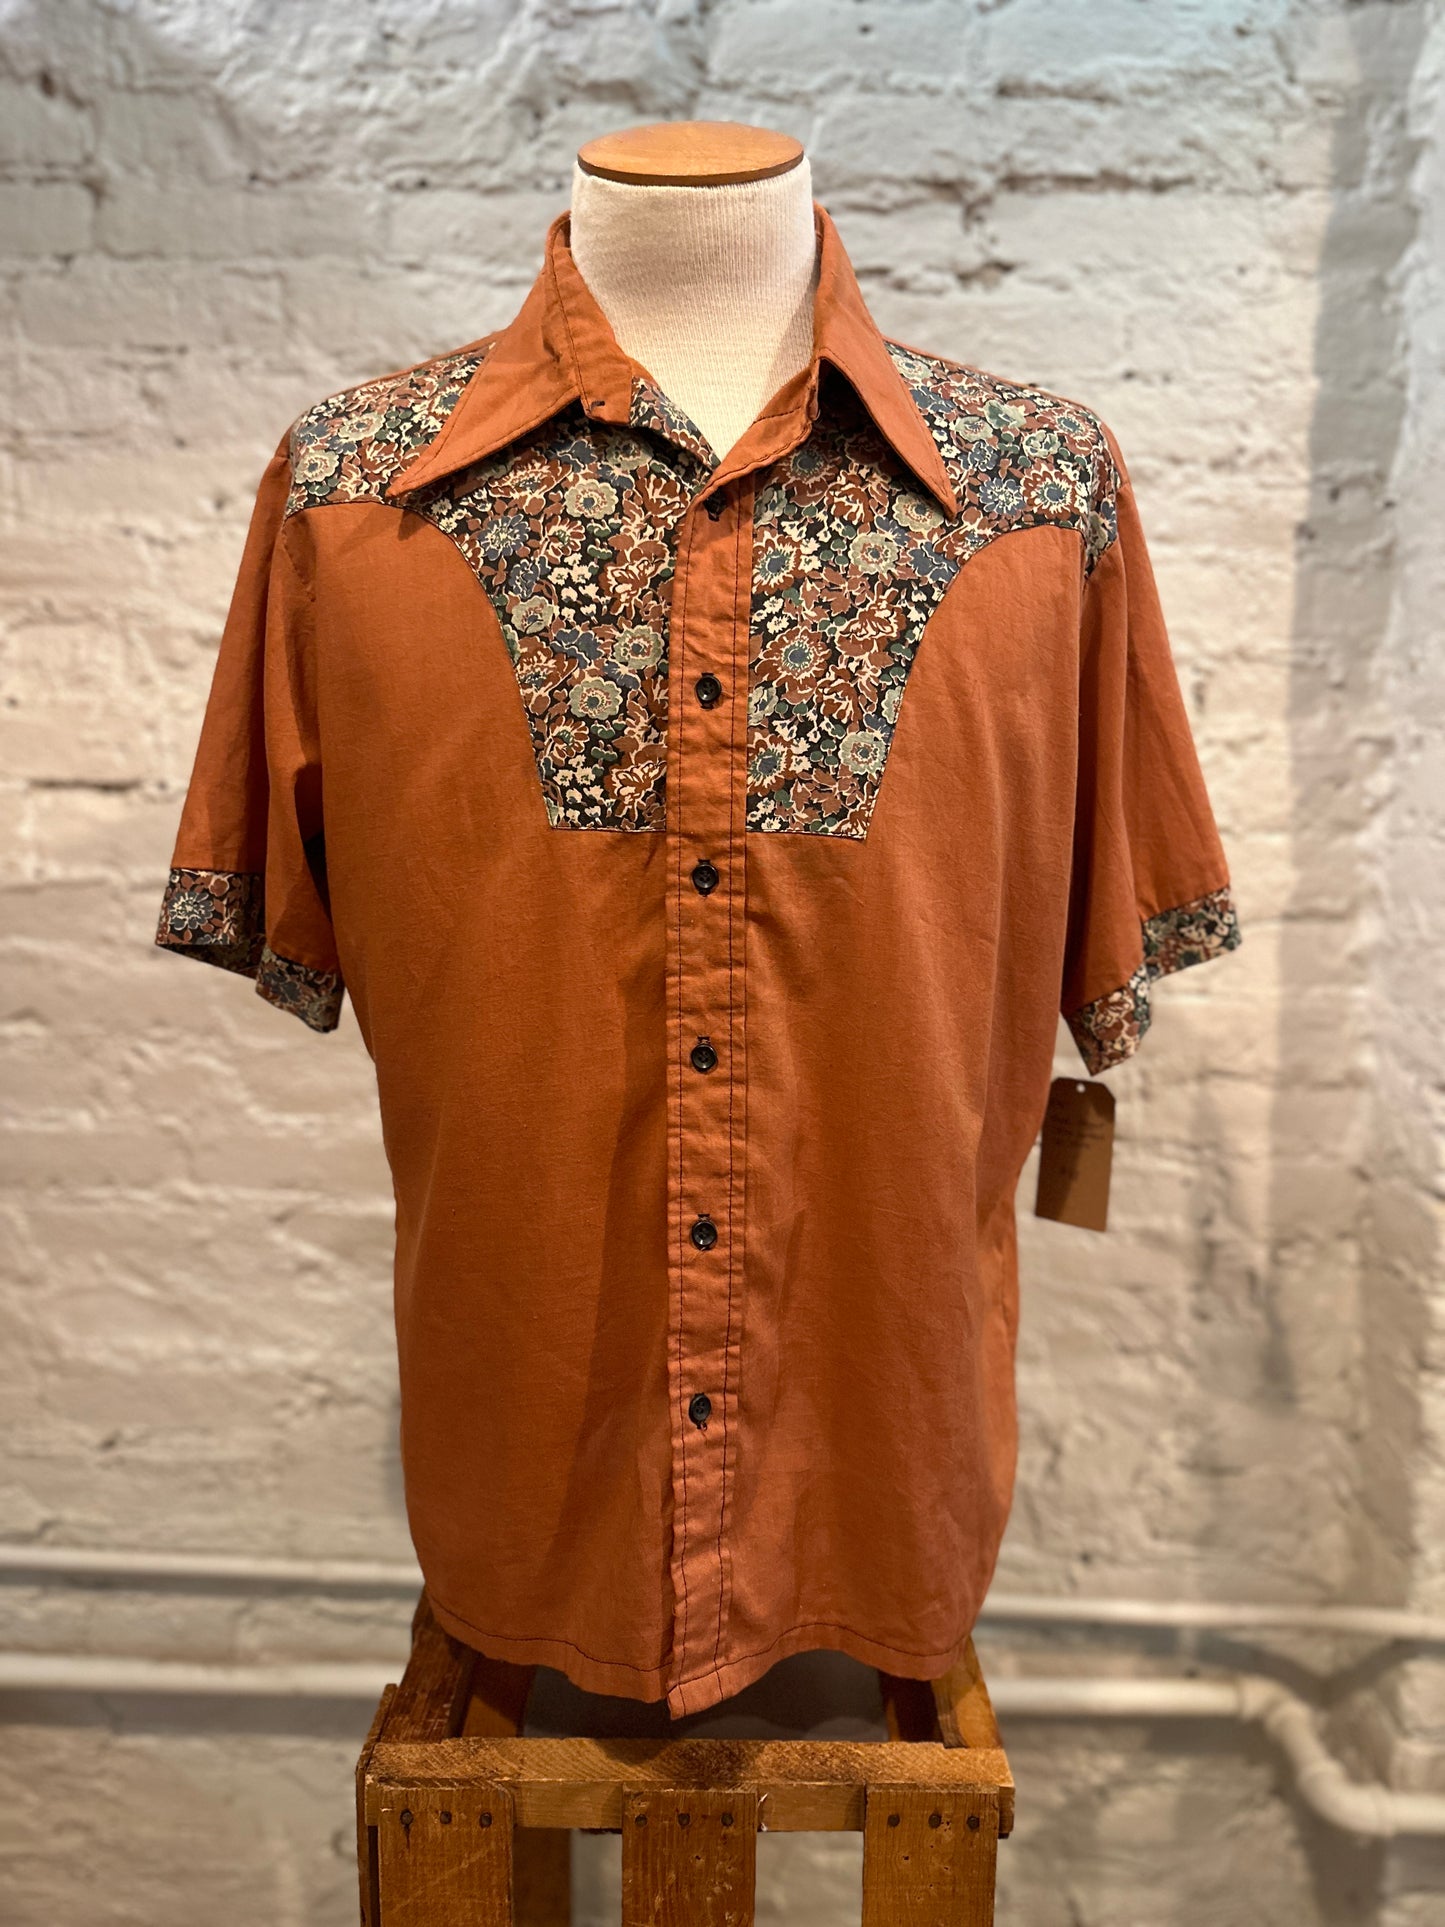 1970's Mens Button Up Shirt with Floral Accents